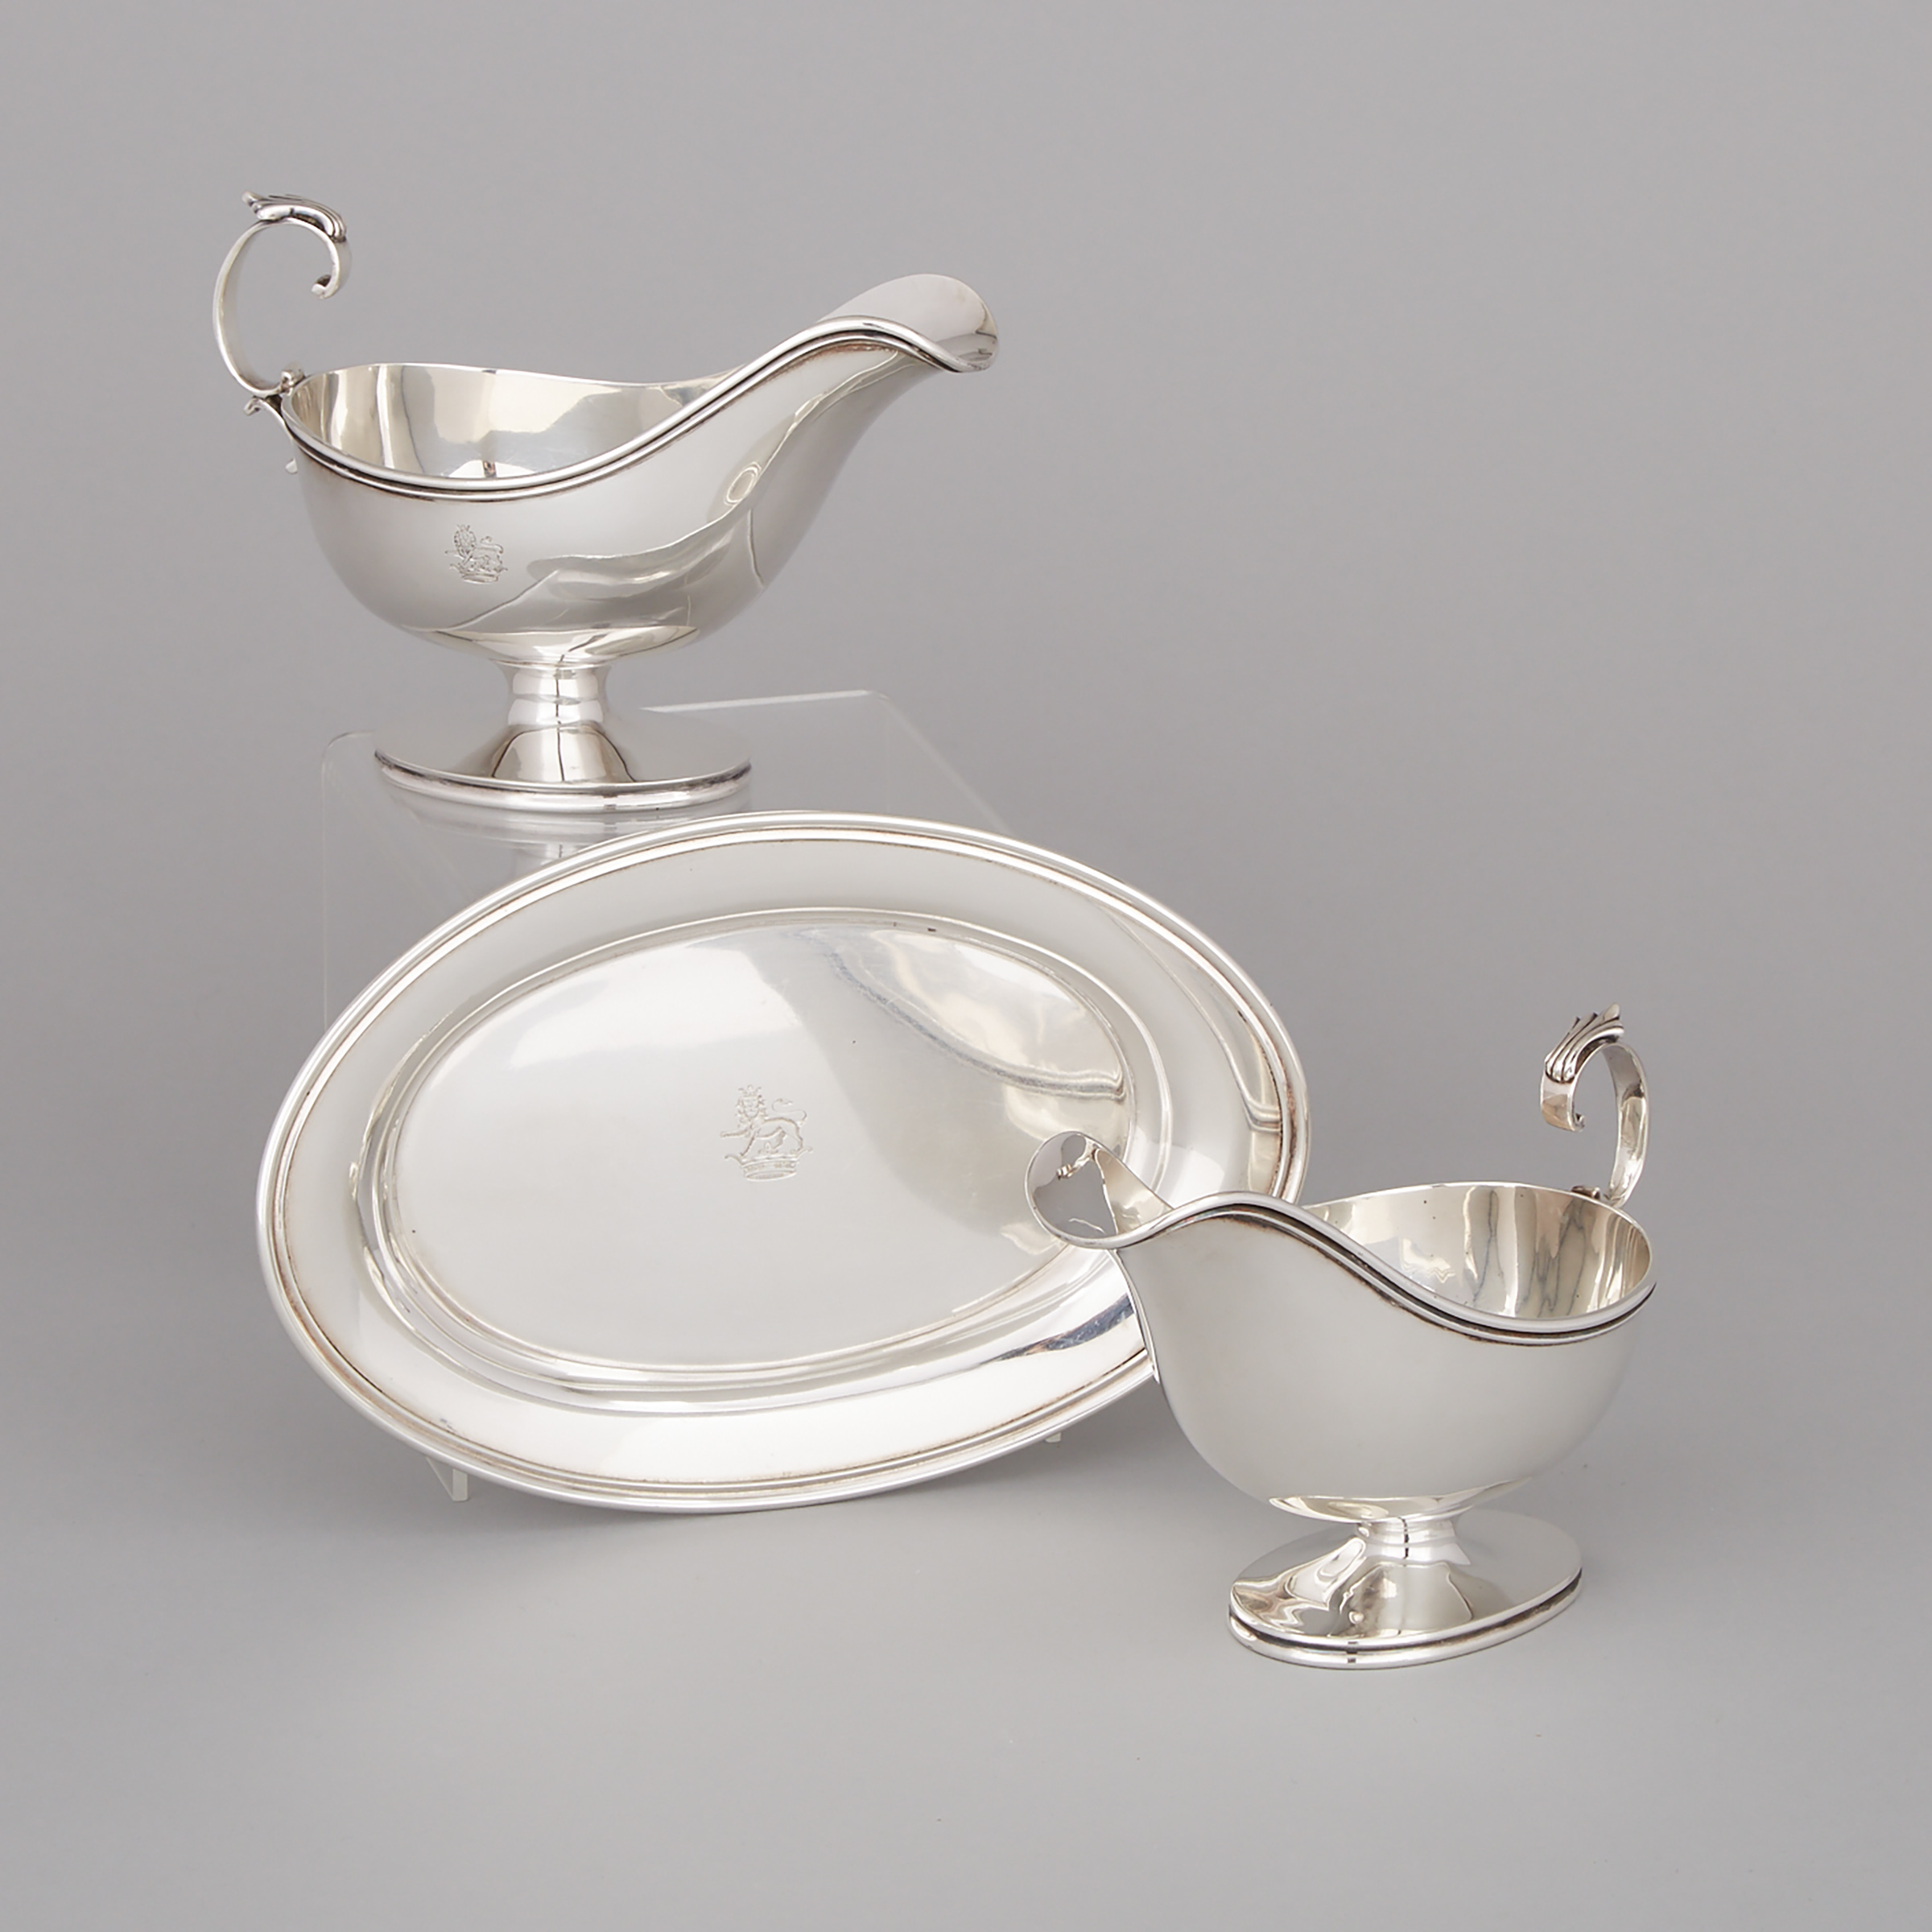 Two Canadian Silver Sauce Boats and an Oval Dish, Henry Birks & Sons., Montreal, Que., 1904-24